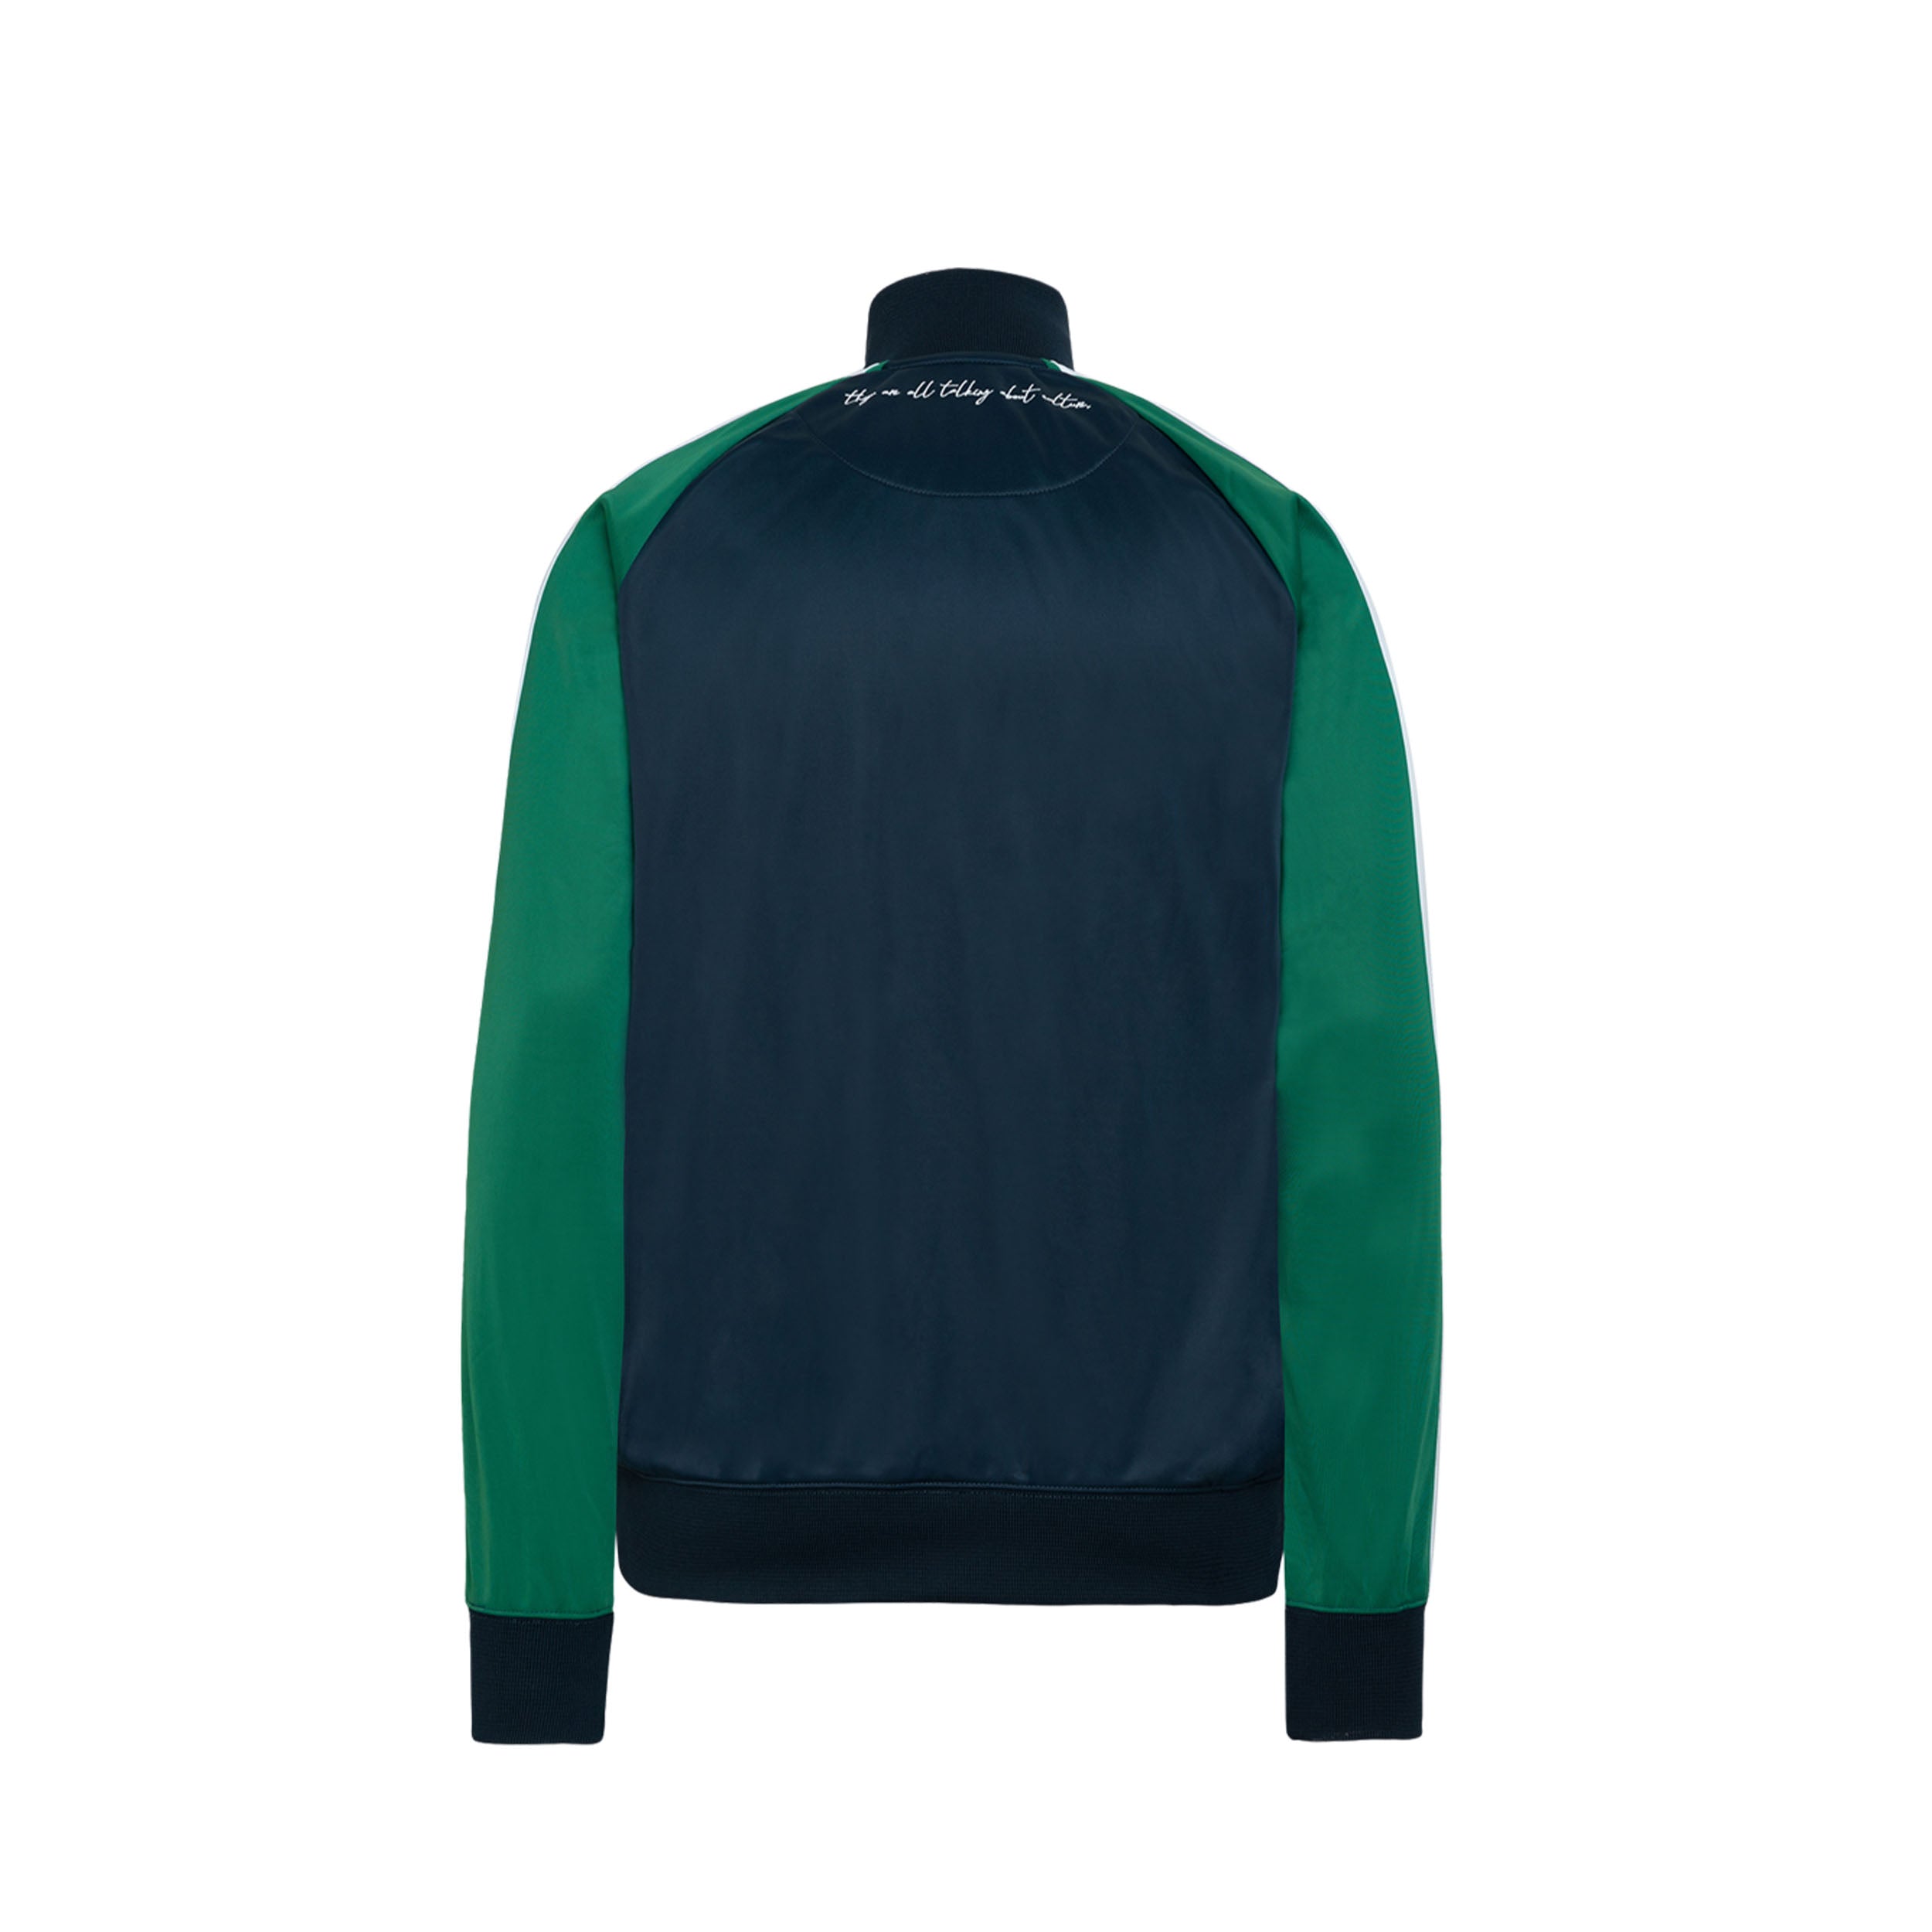 Unfair Athletics Two Side Tracktop (navy/green) - Blue Mountain Store